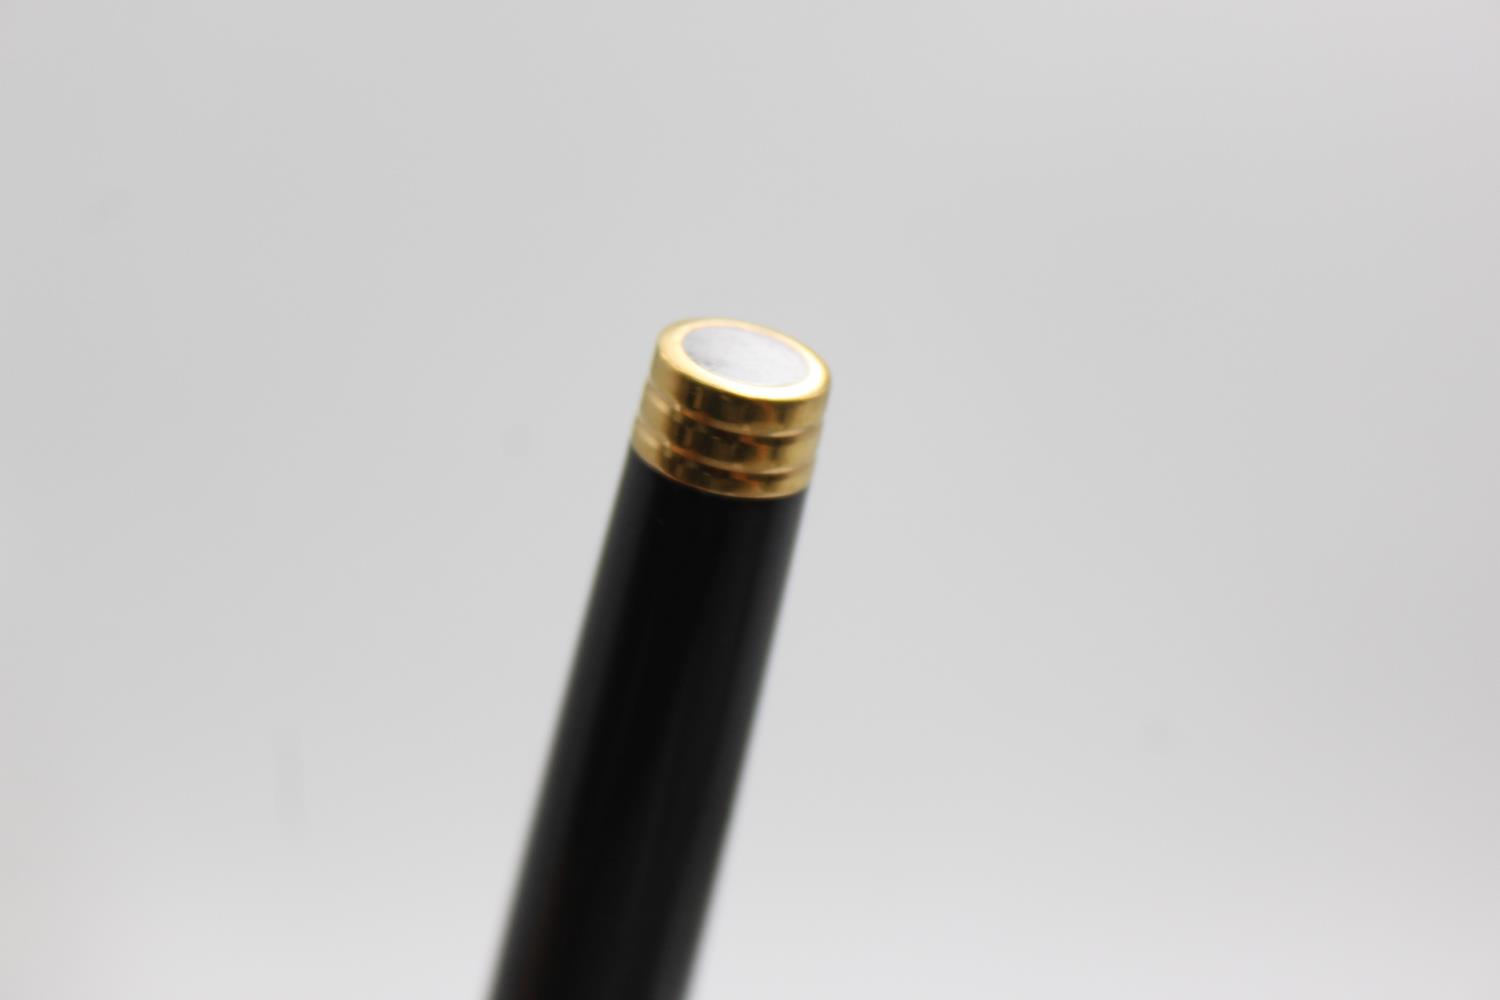 WATERMAN Black Lacquer FOUNTAIN PEN w/ 18ct Gold Nib WRITING WATERMAN Black Lacquer FOUNTAIN PEN - Image 4 of 5